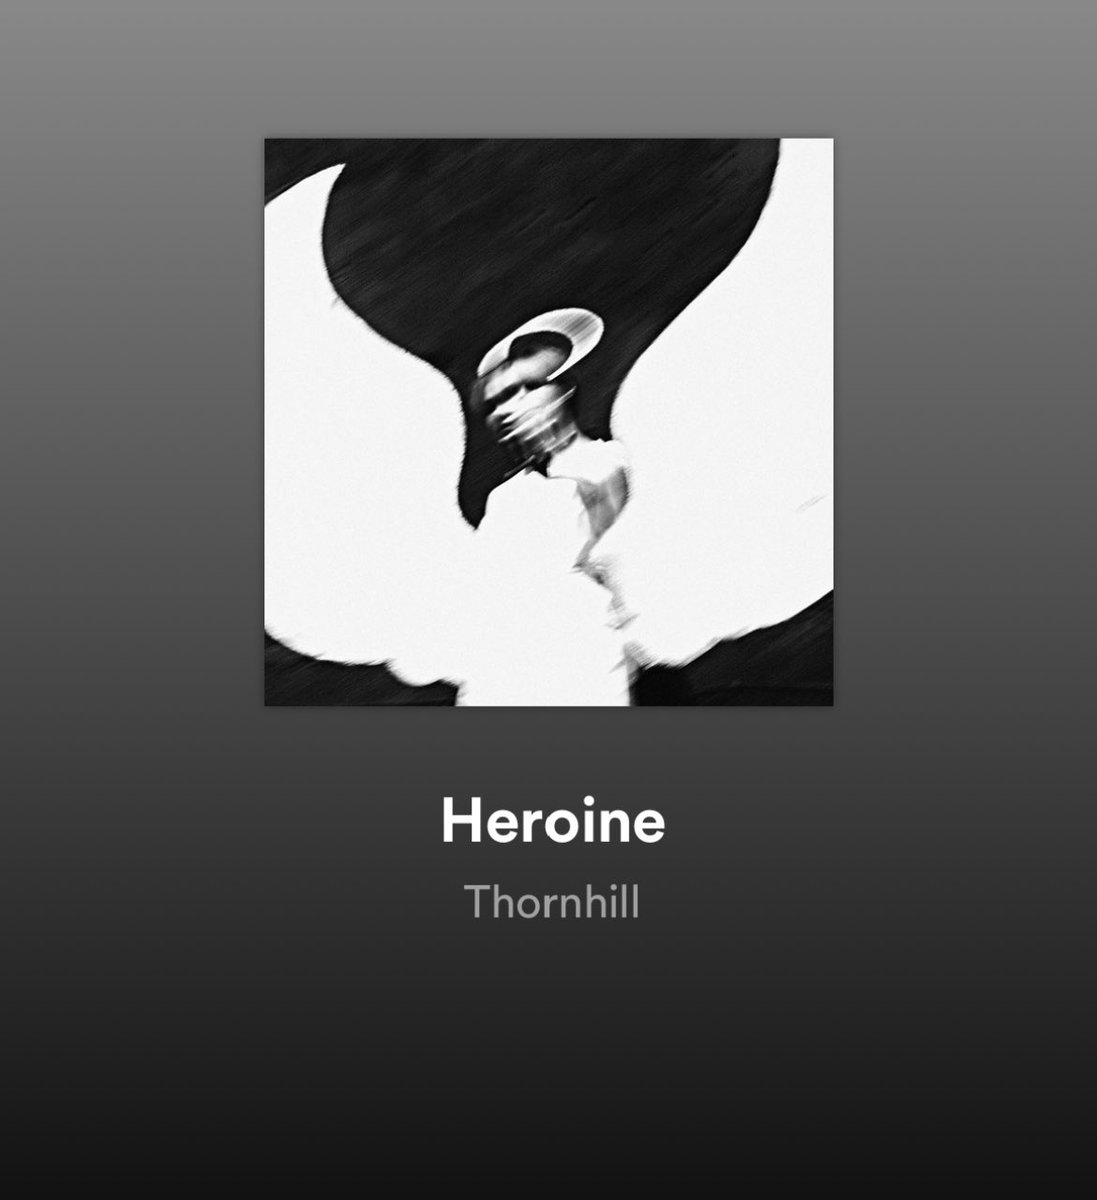 Unfortunately for the office, this album is getting cranked all day 🔥@thornhillmelb you guys have done it again